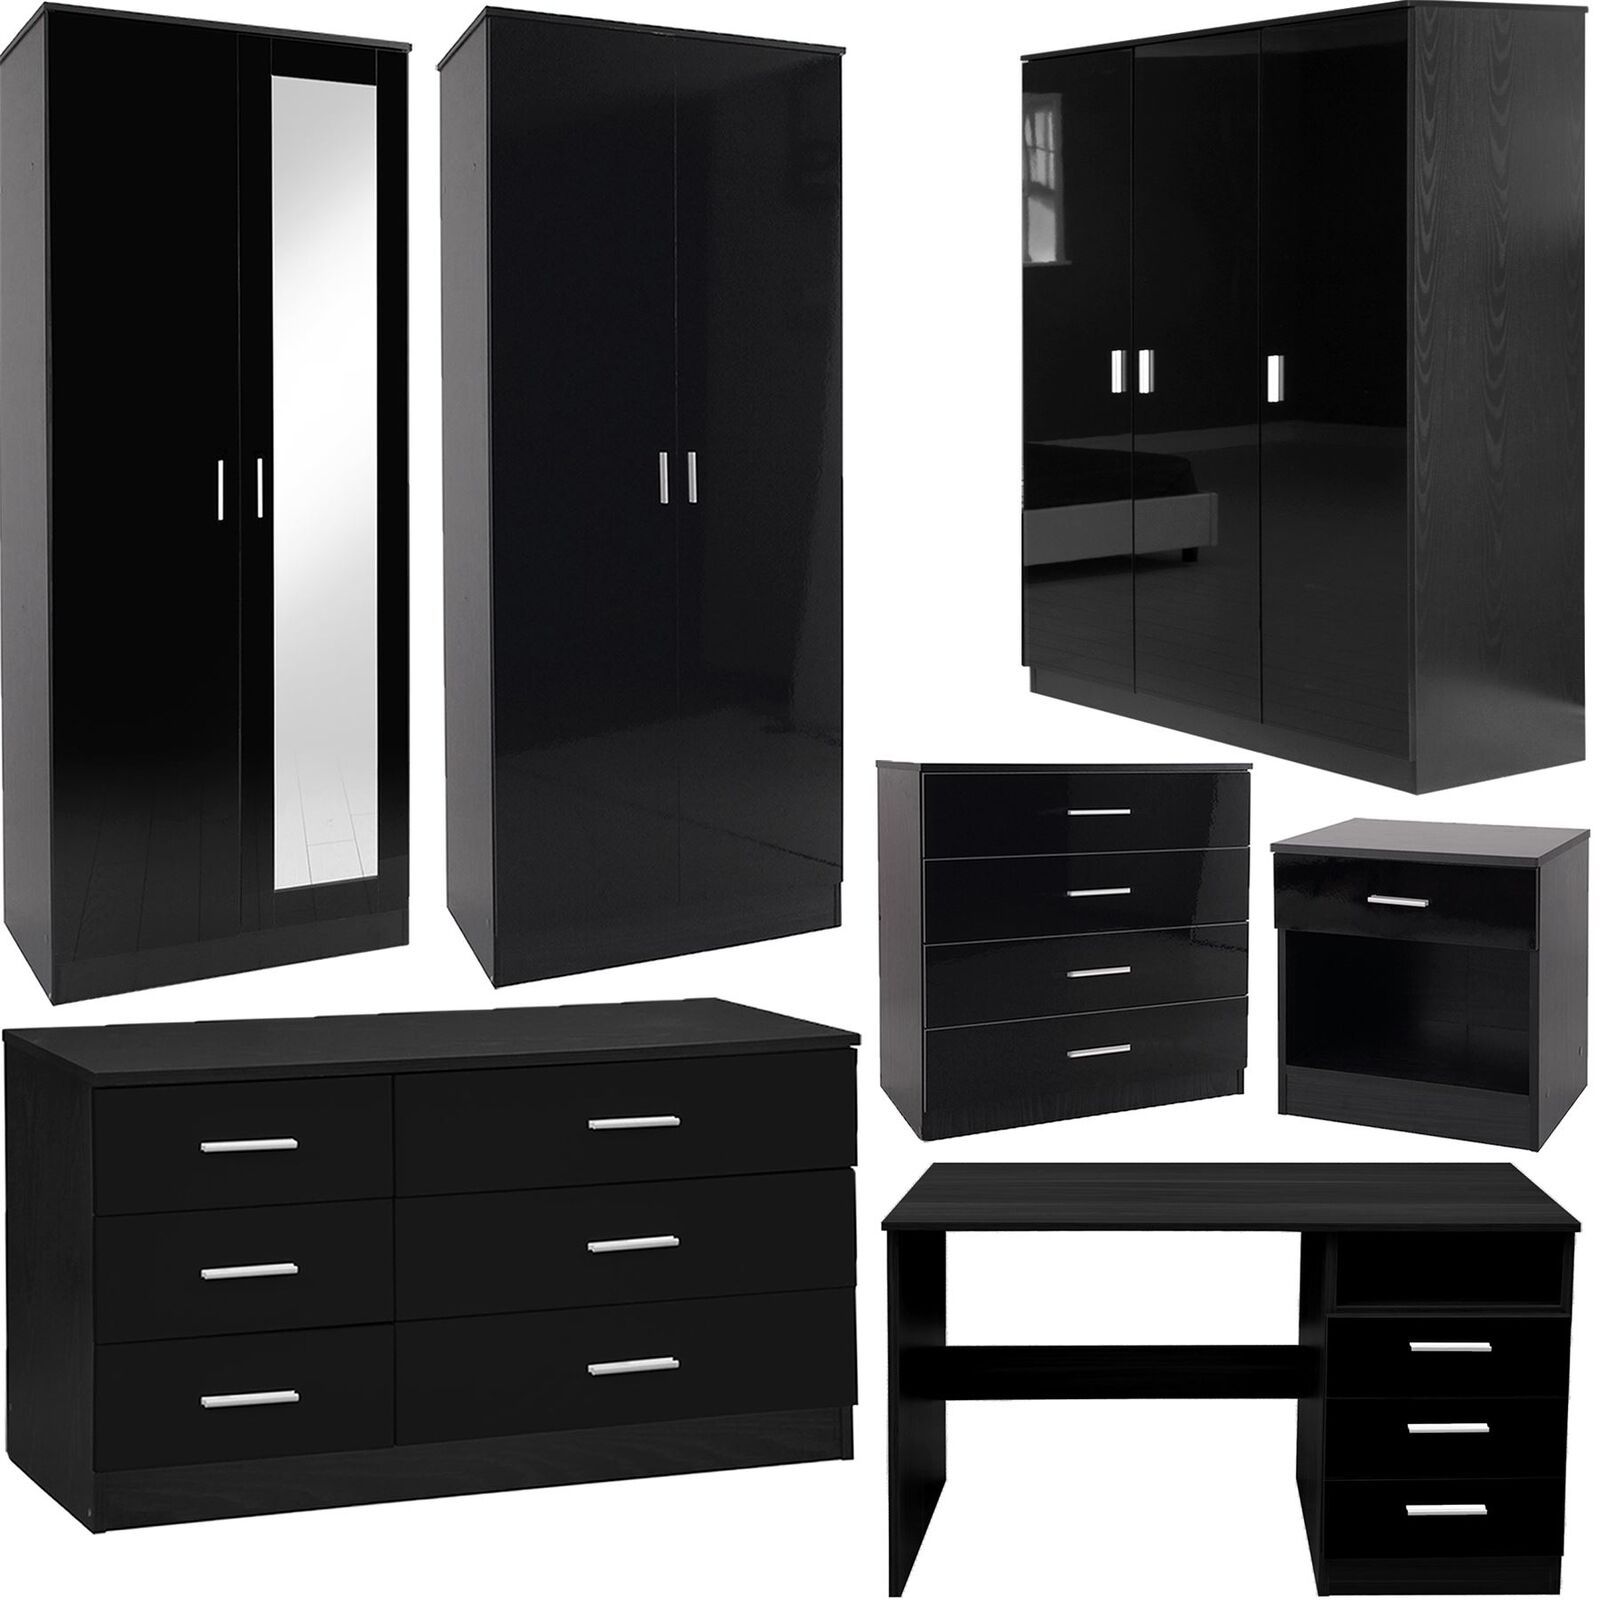 Bedroom Furniture 3 Piece Set Black Gloss Wardrobe Drawer Bedside Chest  Table | Ebay For Black Wardrobes With Drawers (View 9 of 15)